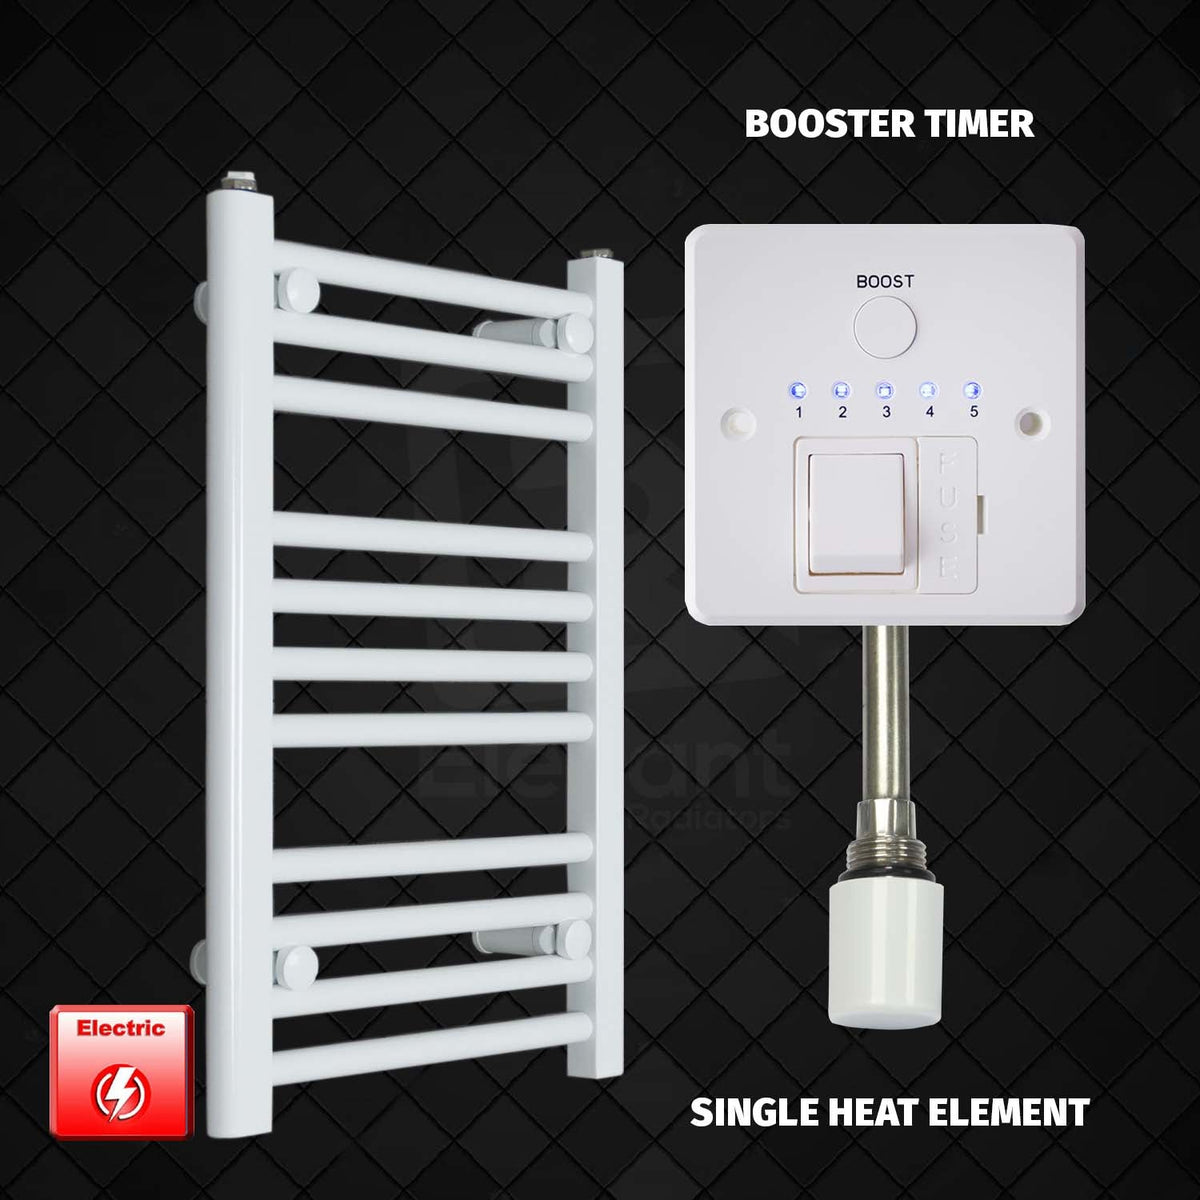 600 mm High 400 mm Wide Pre-Filled Electric Heated Towel Rail Radiator White HTR Single Heat Element With Booster Timer